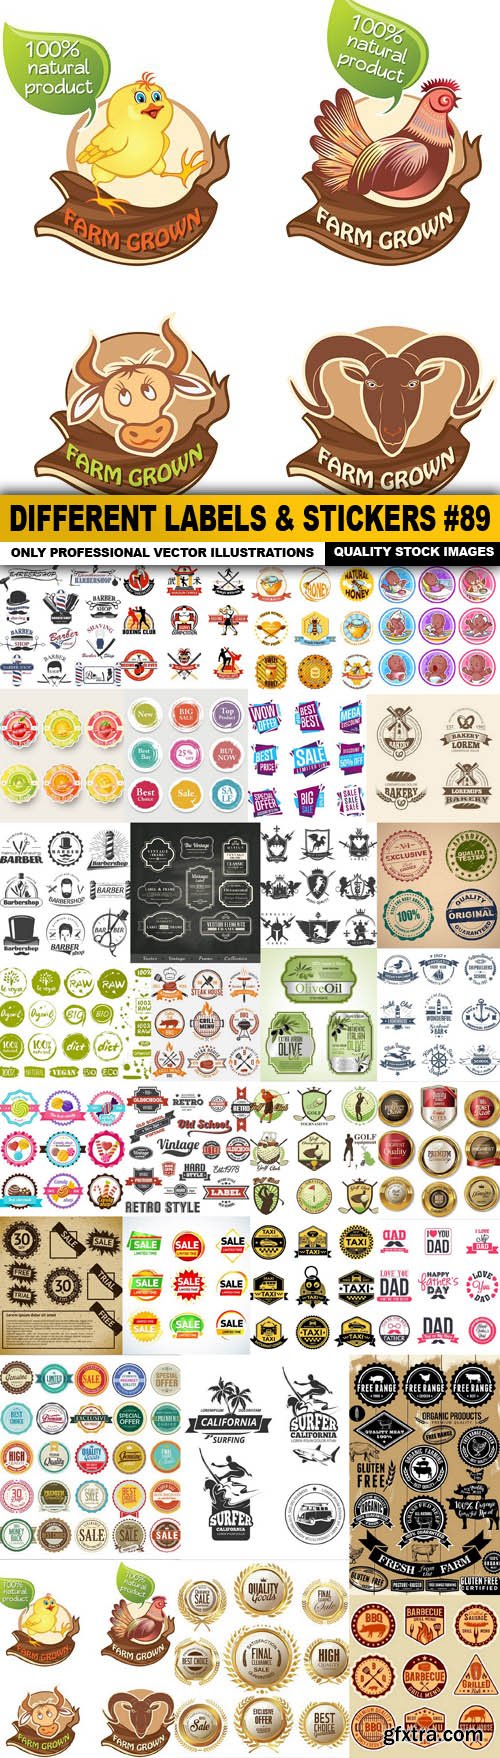 Different Labels & Stickers #89 - 30 Vector